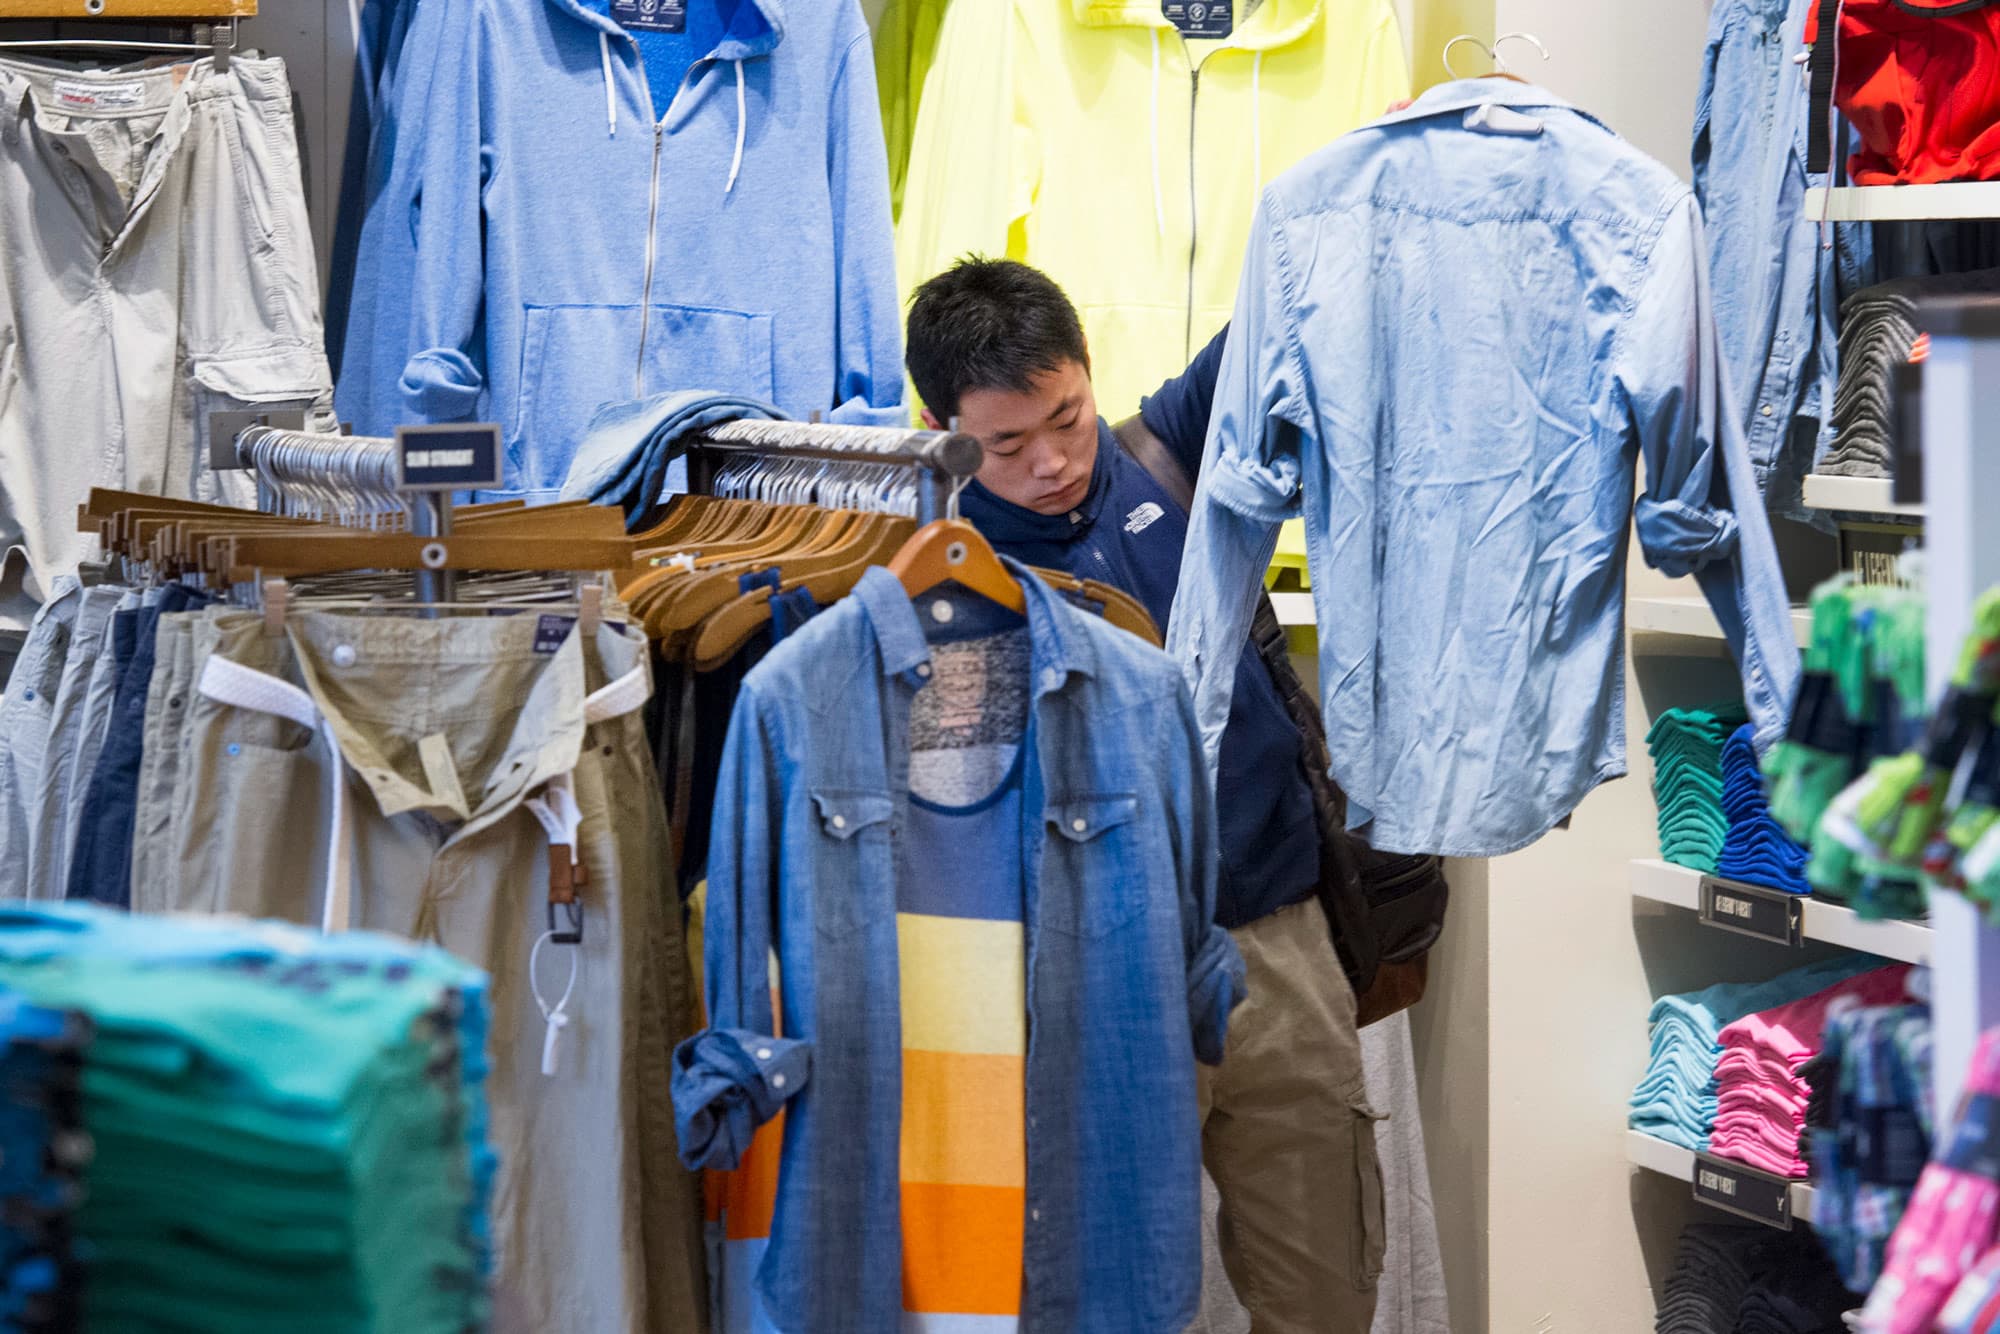 Inflation: Clothes are expensive even as retailers try to clear